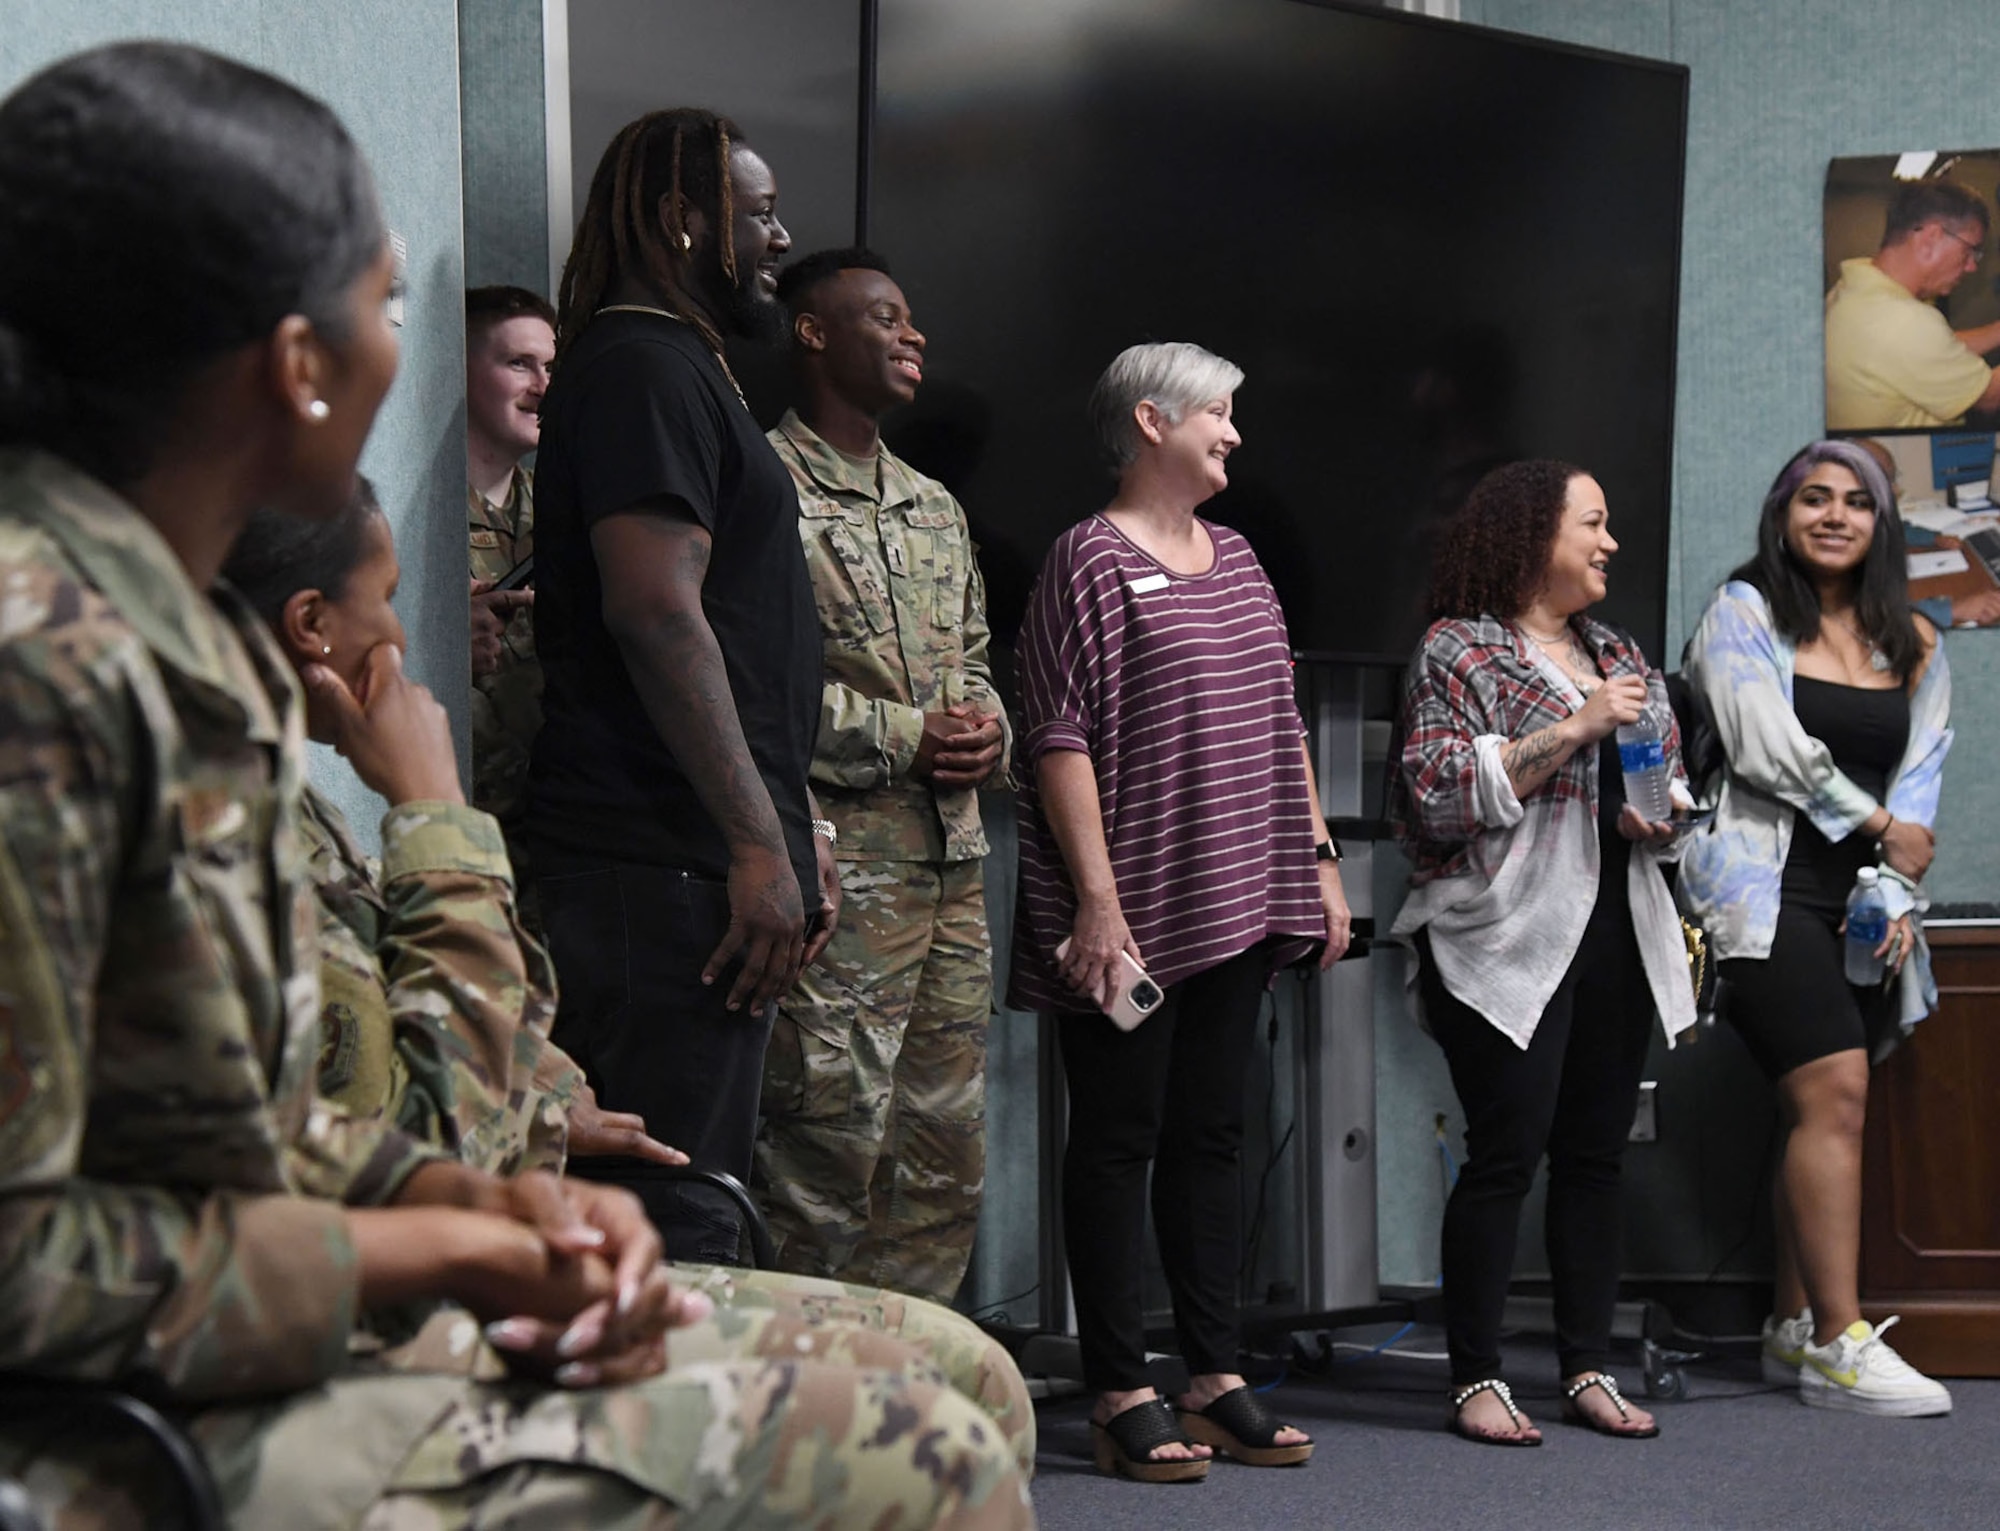 Amber Najm and her husband, T-Pain, an American rapper, tour the 81st Communications Squadron at Keesler Air Force Base, Mississippi, May 19, 2022. Amber served in the Air Force and was assigned to the 81st CS from 2001-2004. (U.S. Air Force photo by Kemberly Groue)